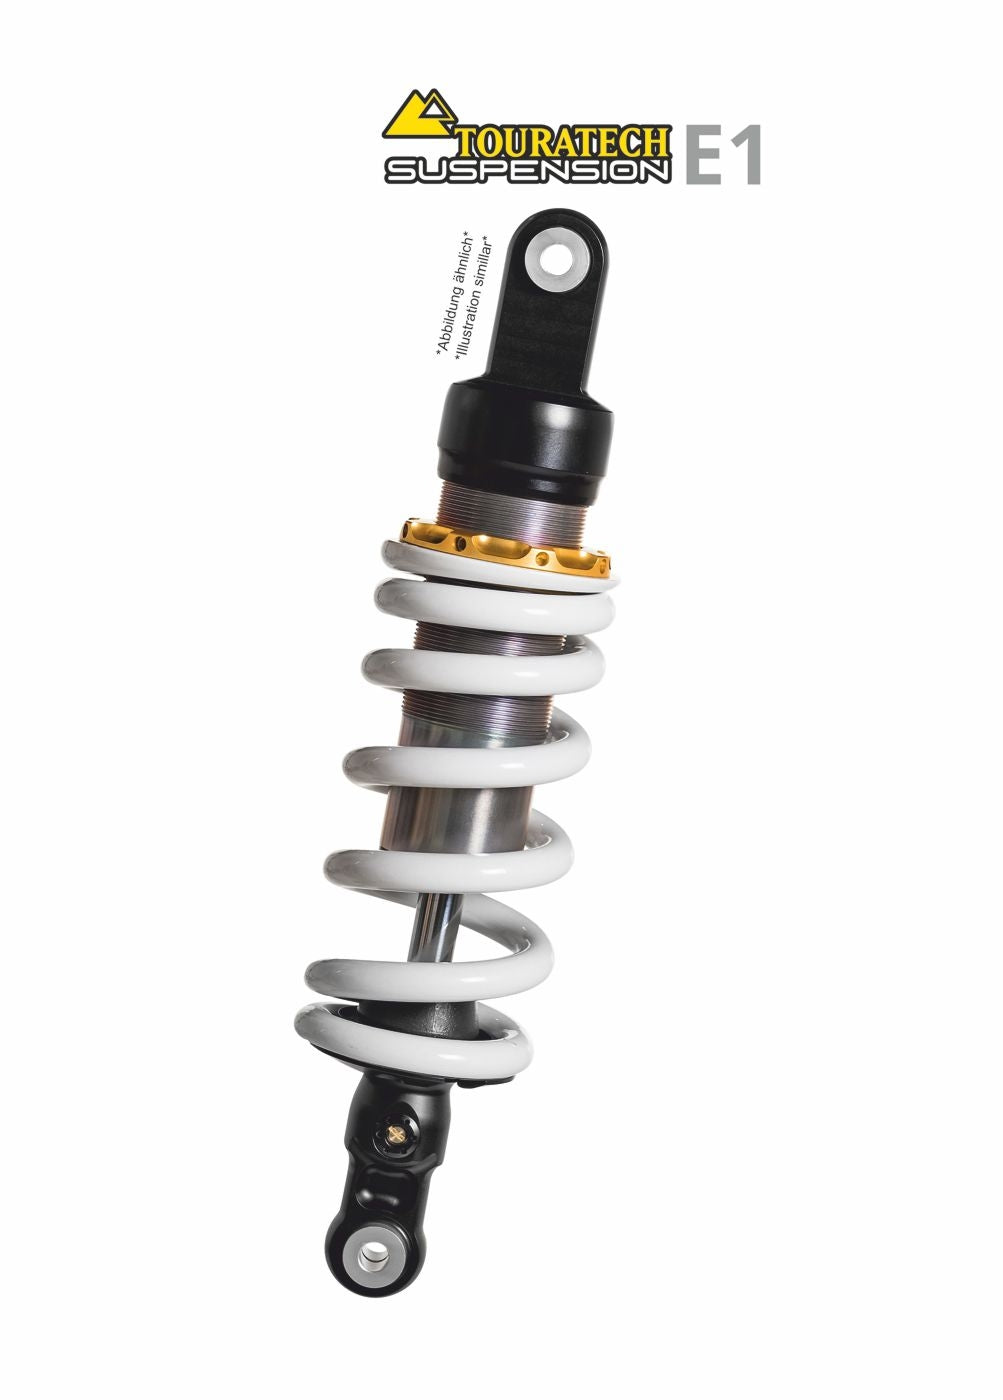 Touratech Suspension E1 shock absorber for Honda XRV 750 AFRICA TWIN 1988 - 1992